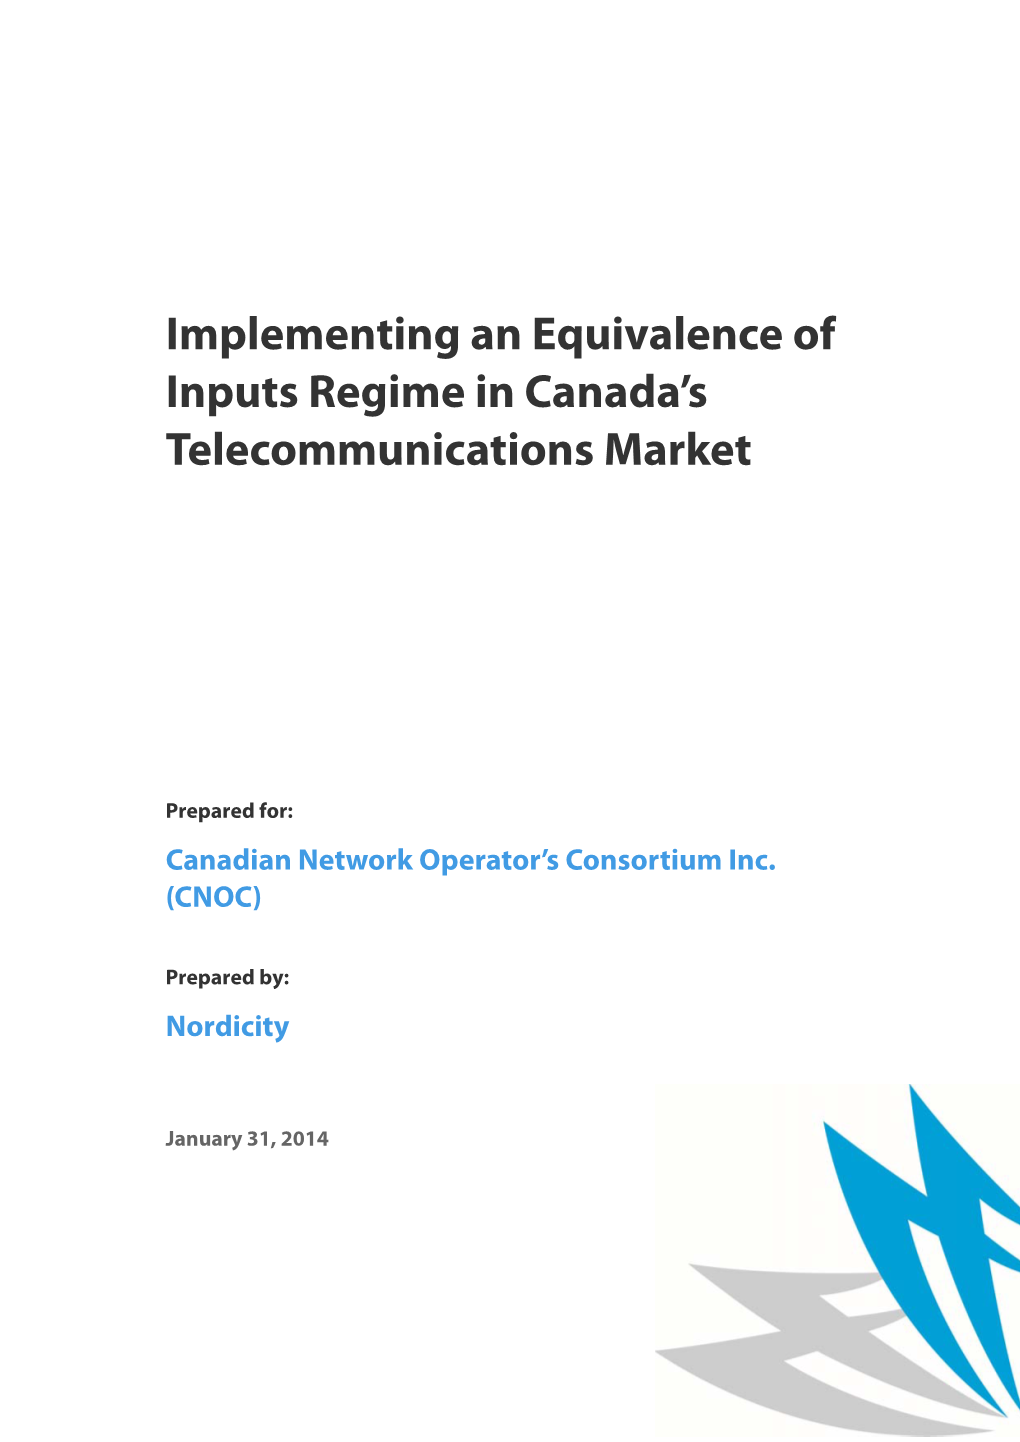 Implementing an Equivalence of Inputs Regime in Canada's Telecommunications Market